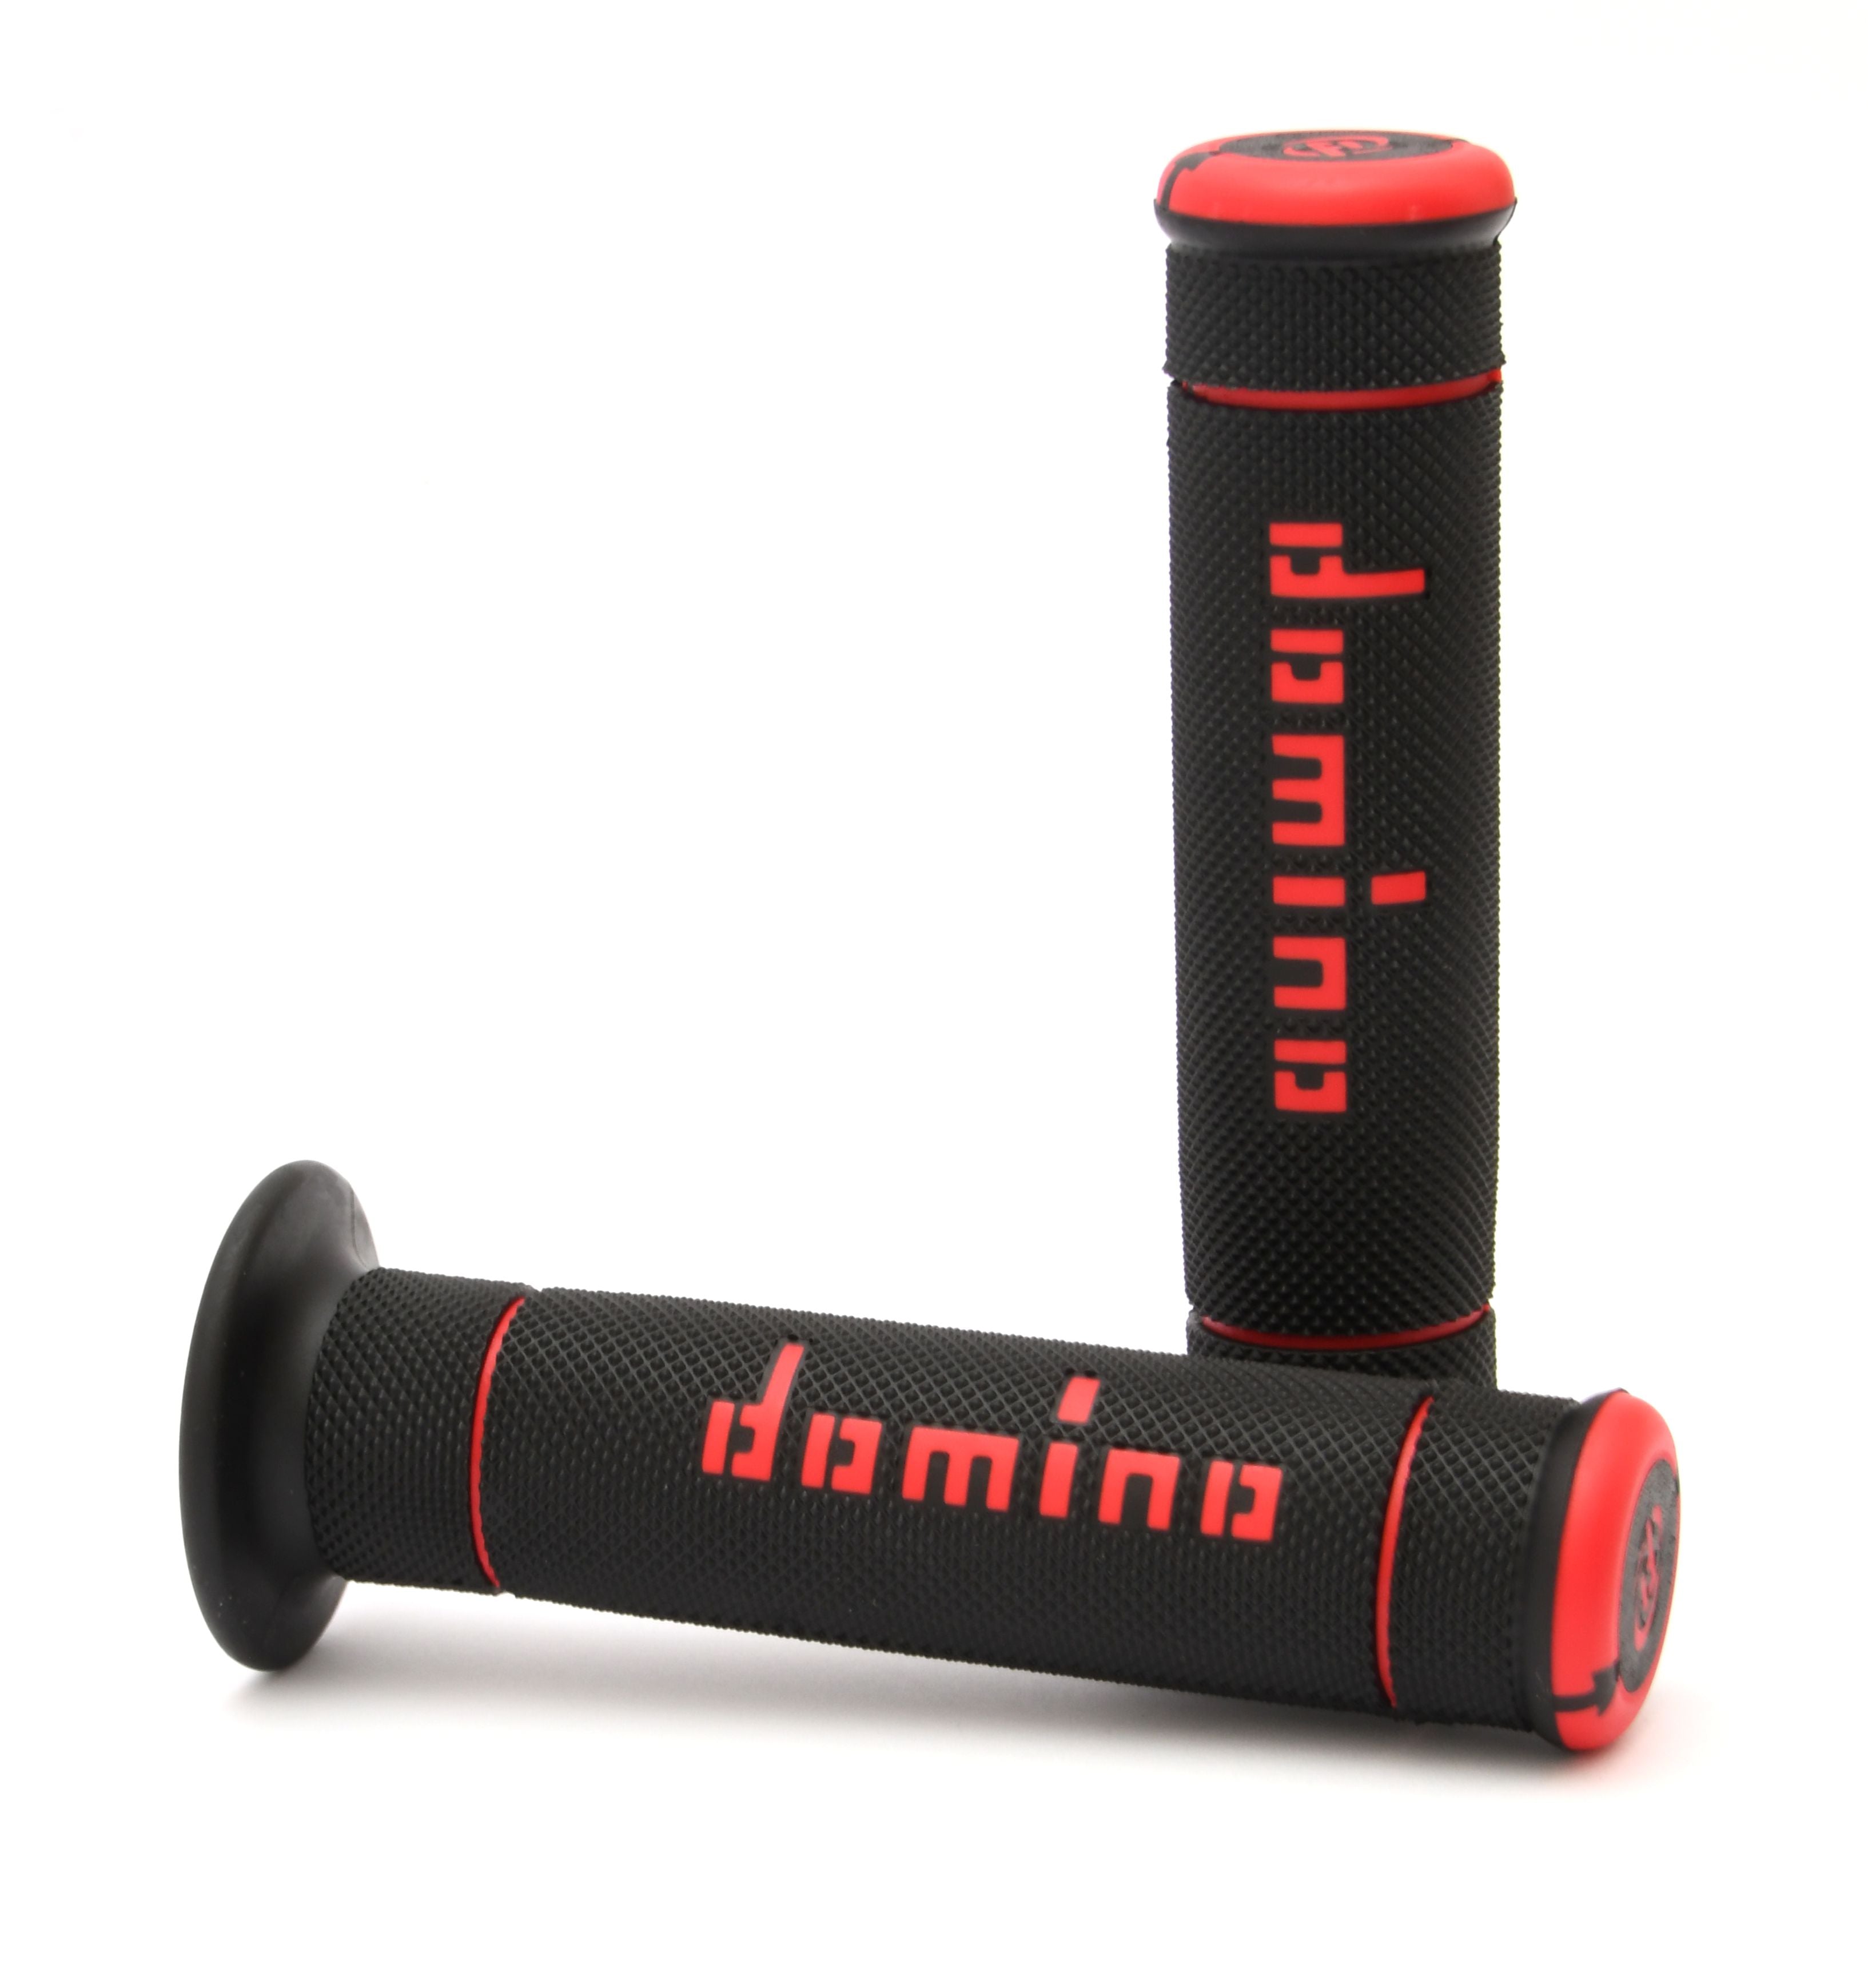 Domino Fast Action Trials Throttle - 0